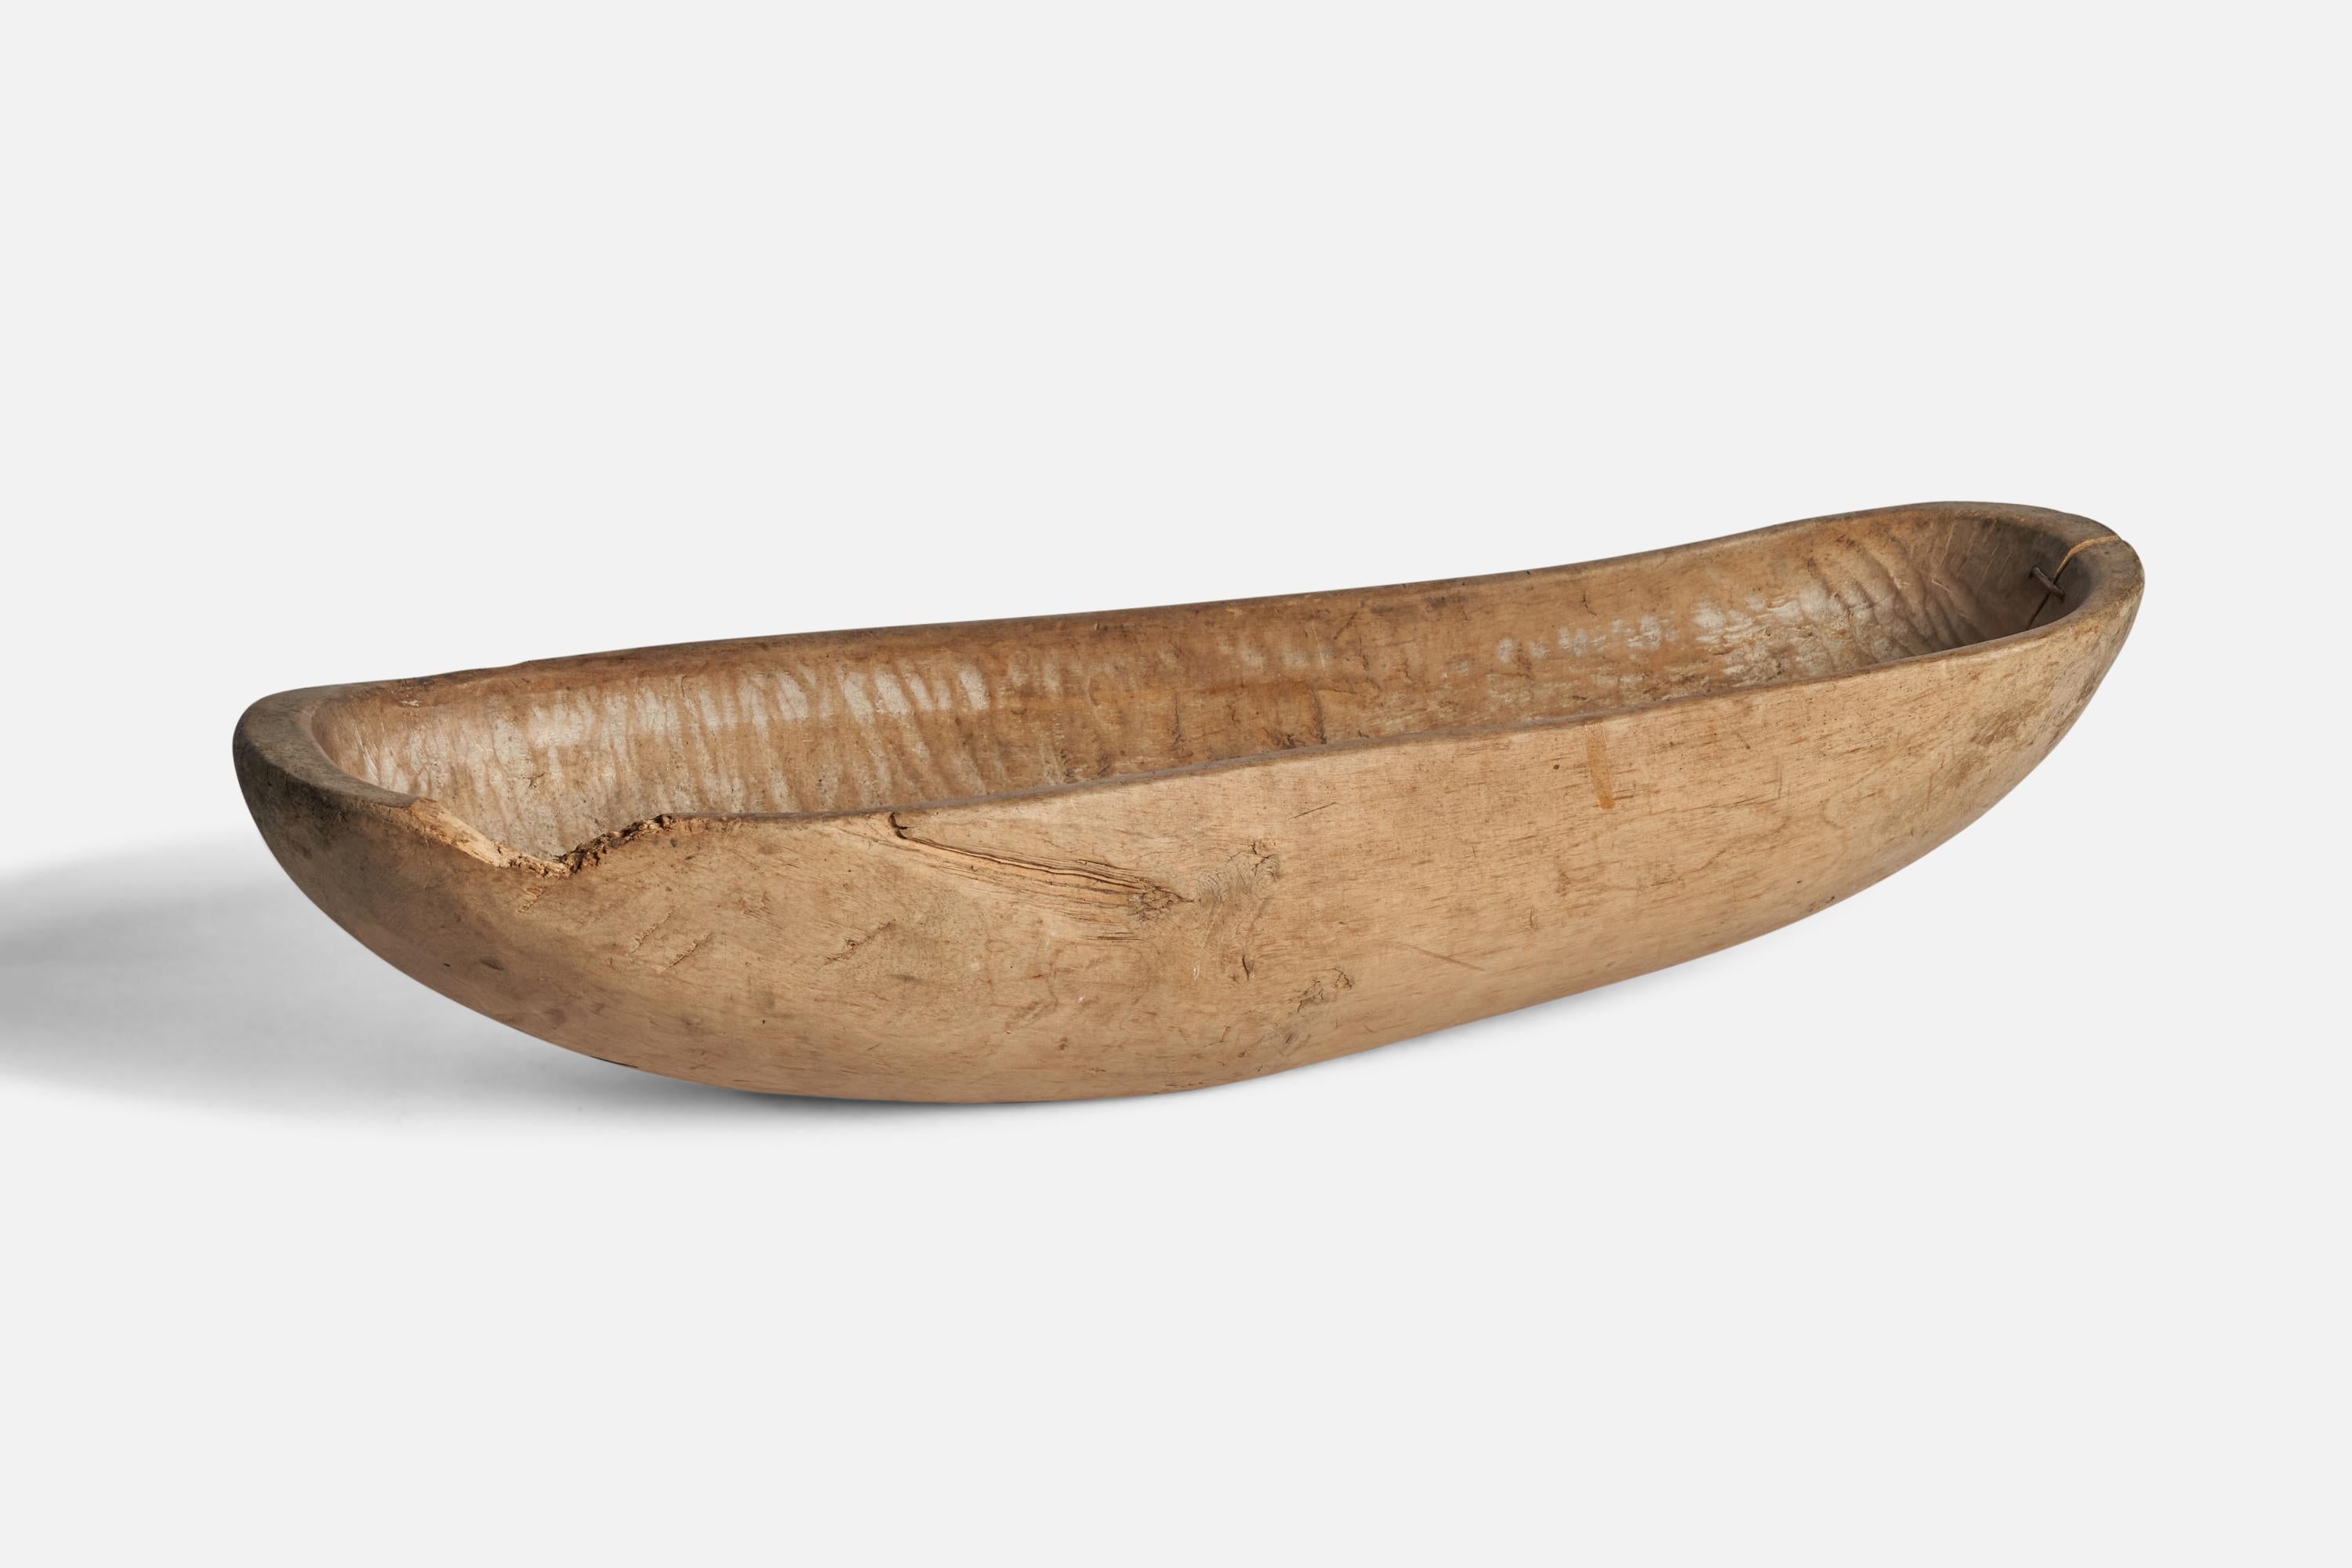 A wooden bowl produced in Sweden in 1814.

“M 1814” engraving on side